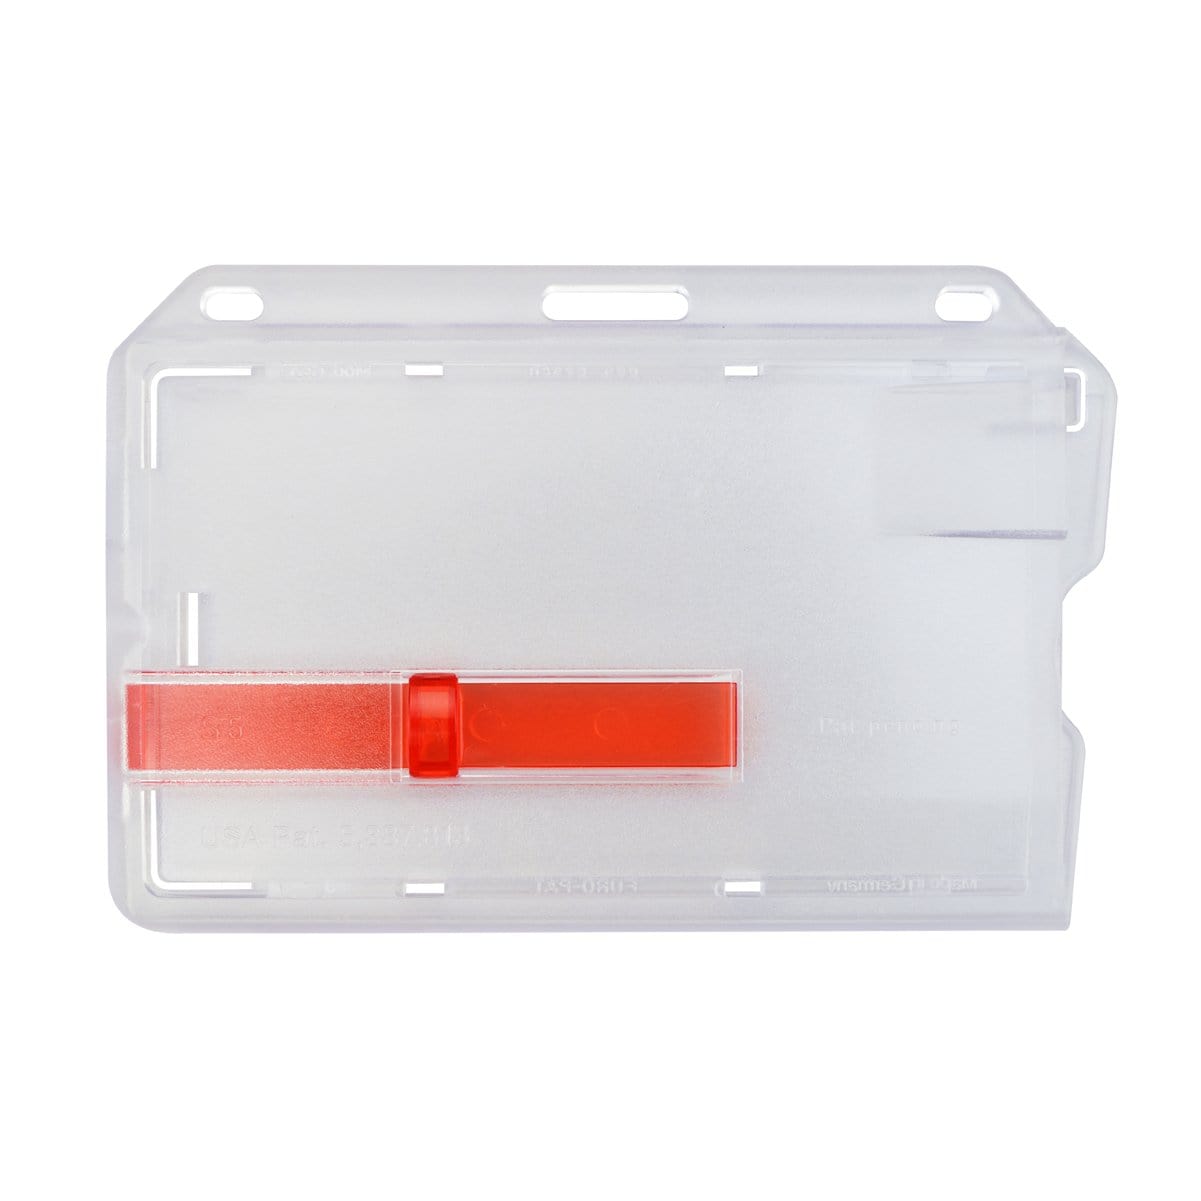 Frosted Horizontal Rigid Plastic Card Dispenser with Red Extractor Slide (1840-6410) 1840-6410